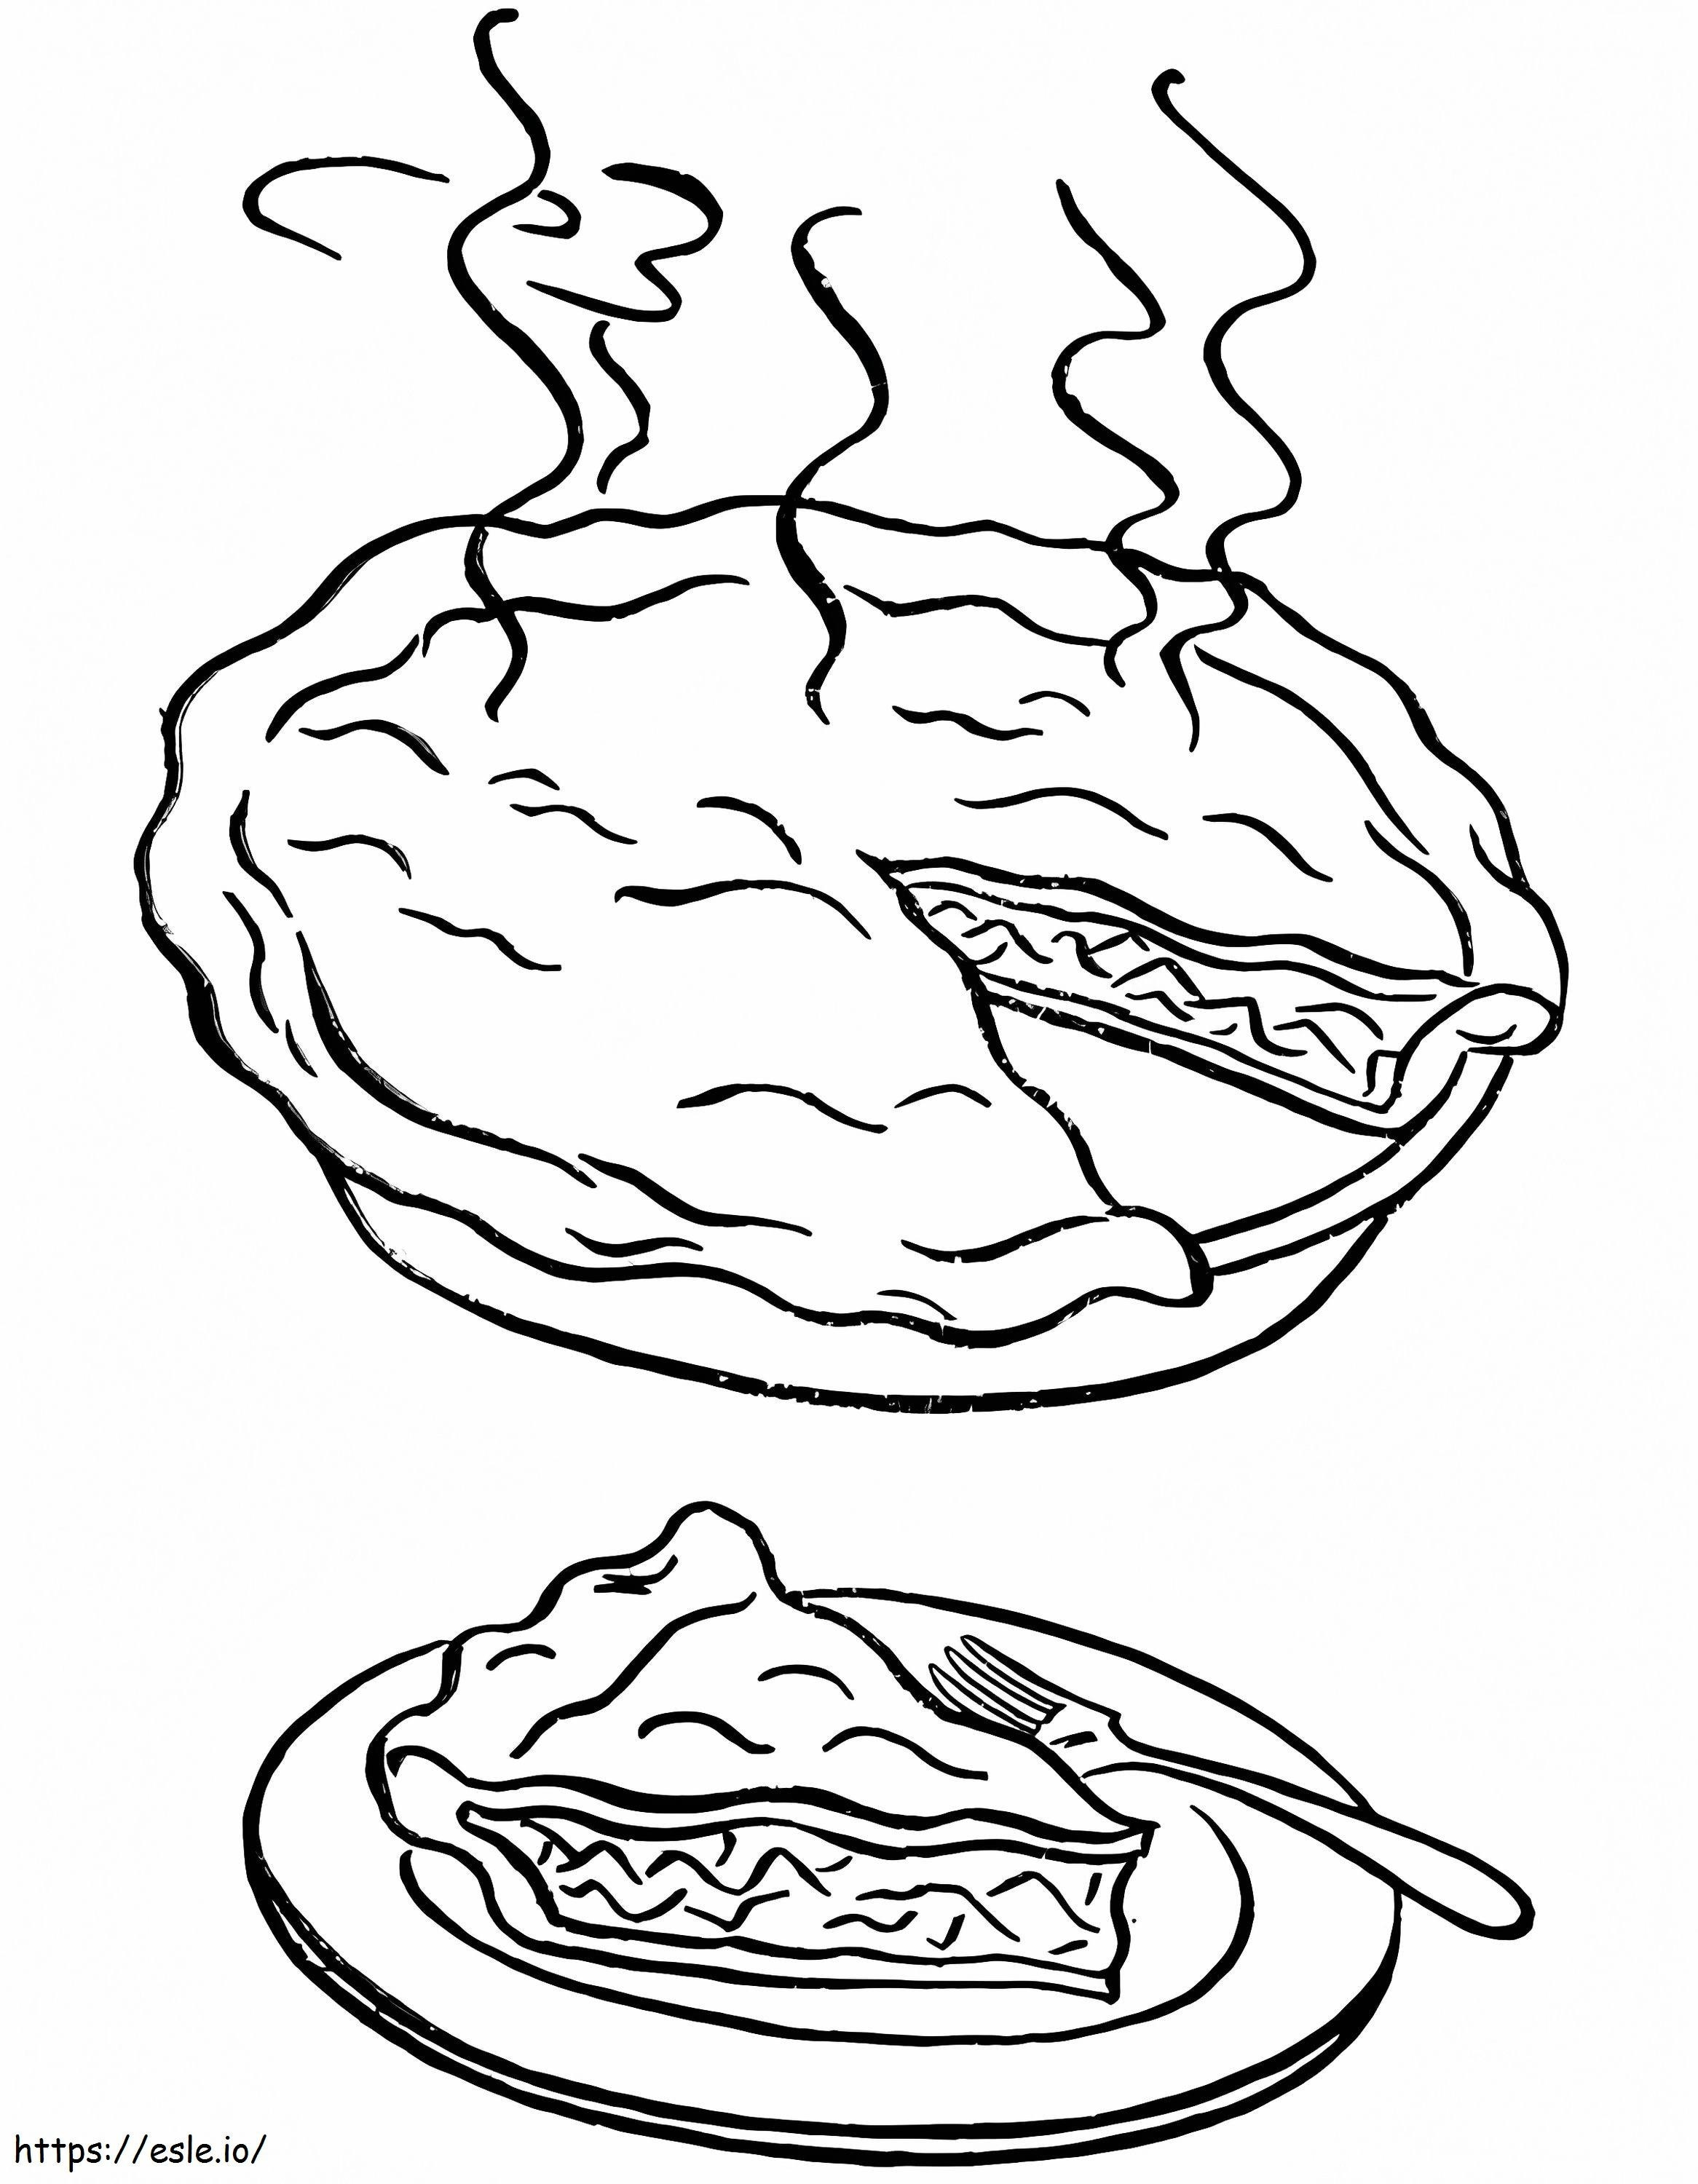 Hot Pie coloring page